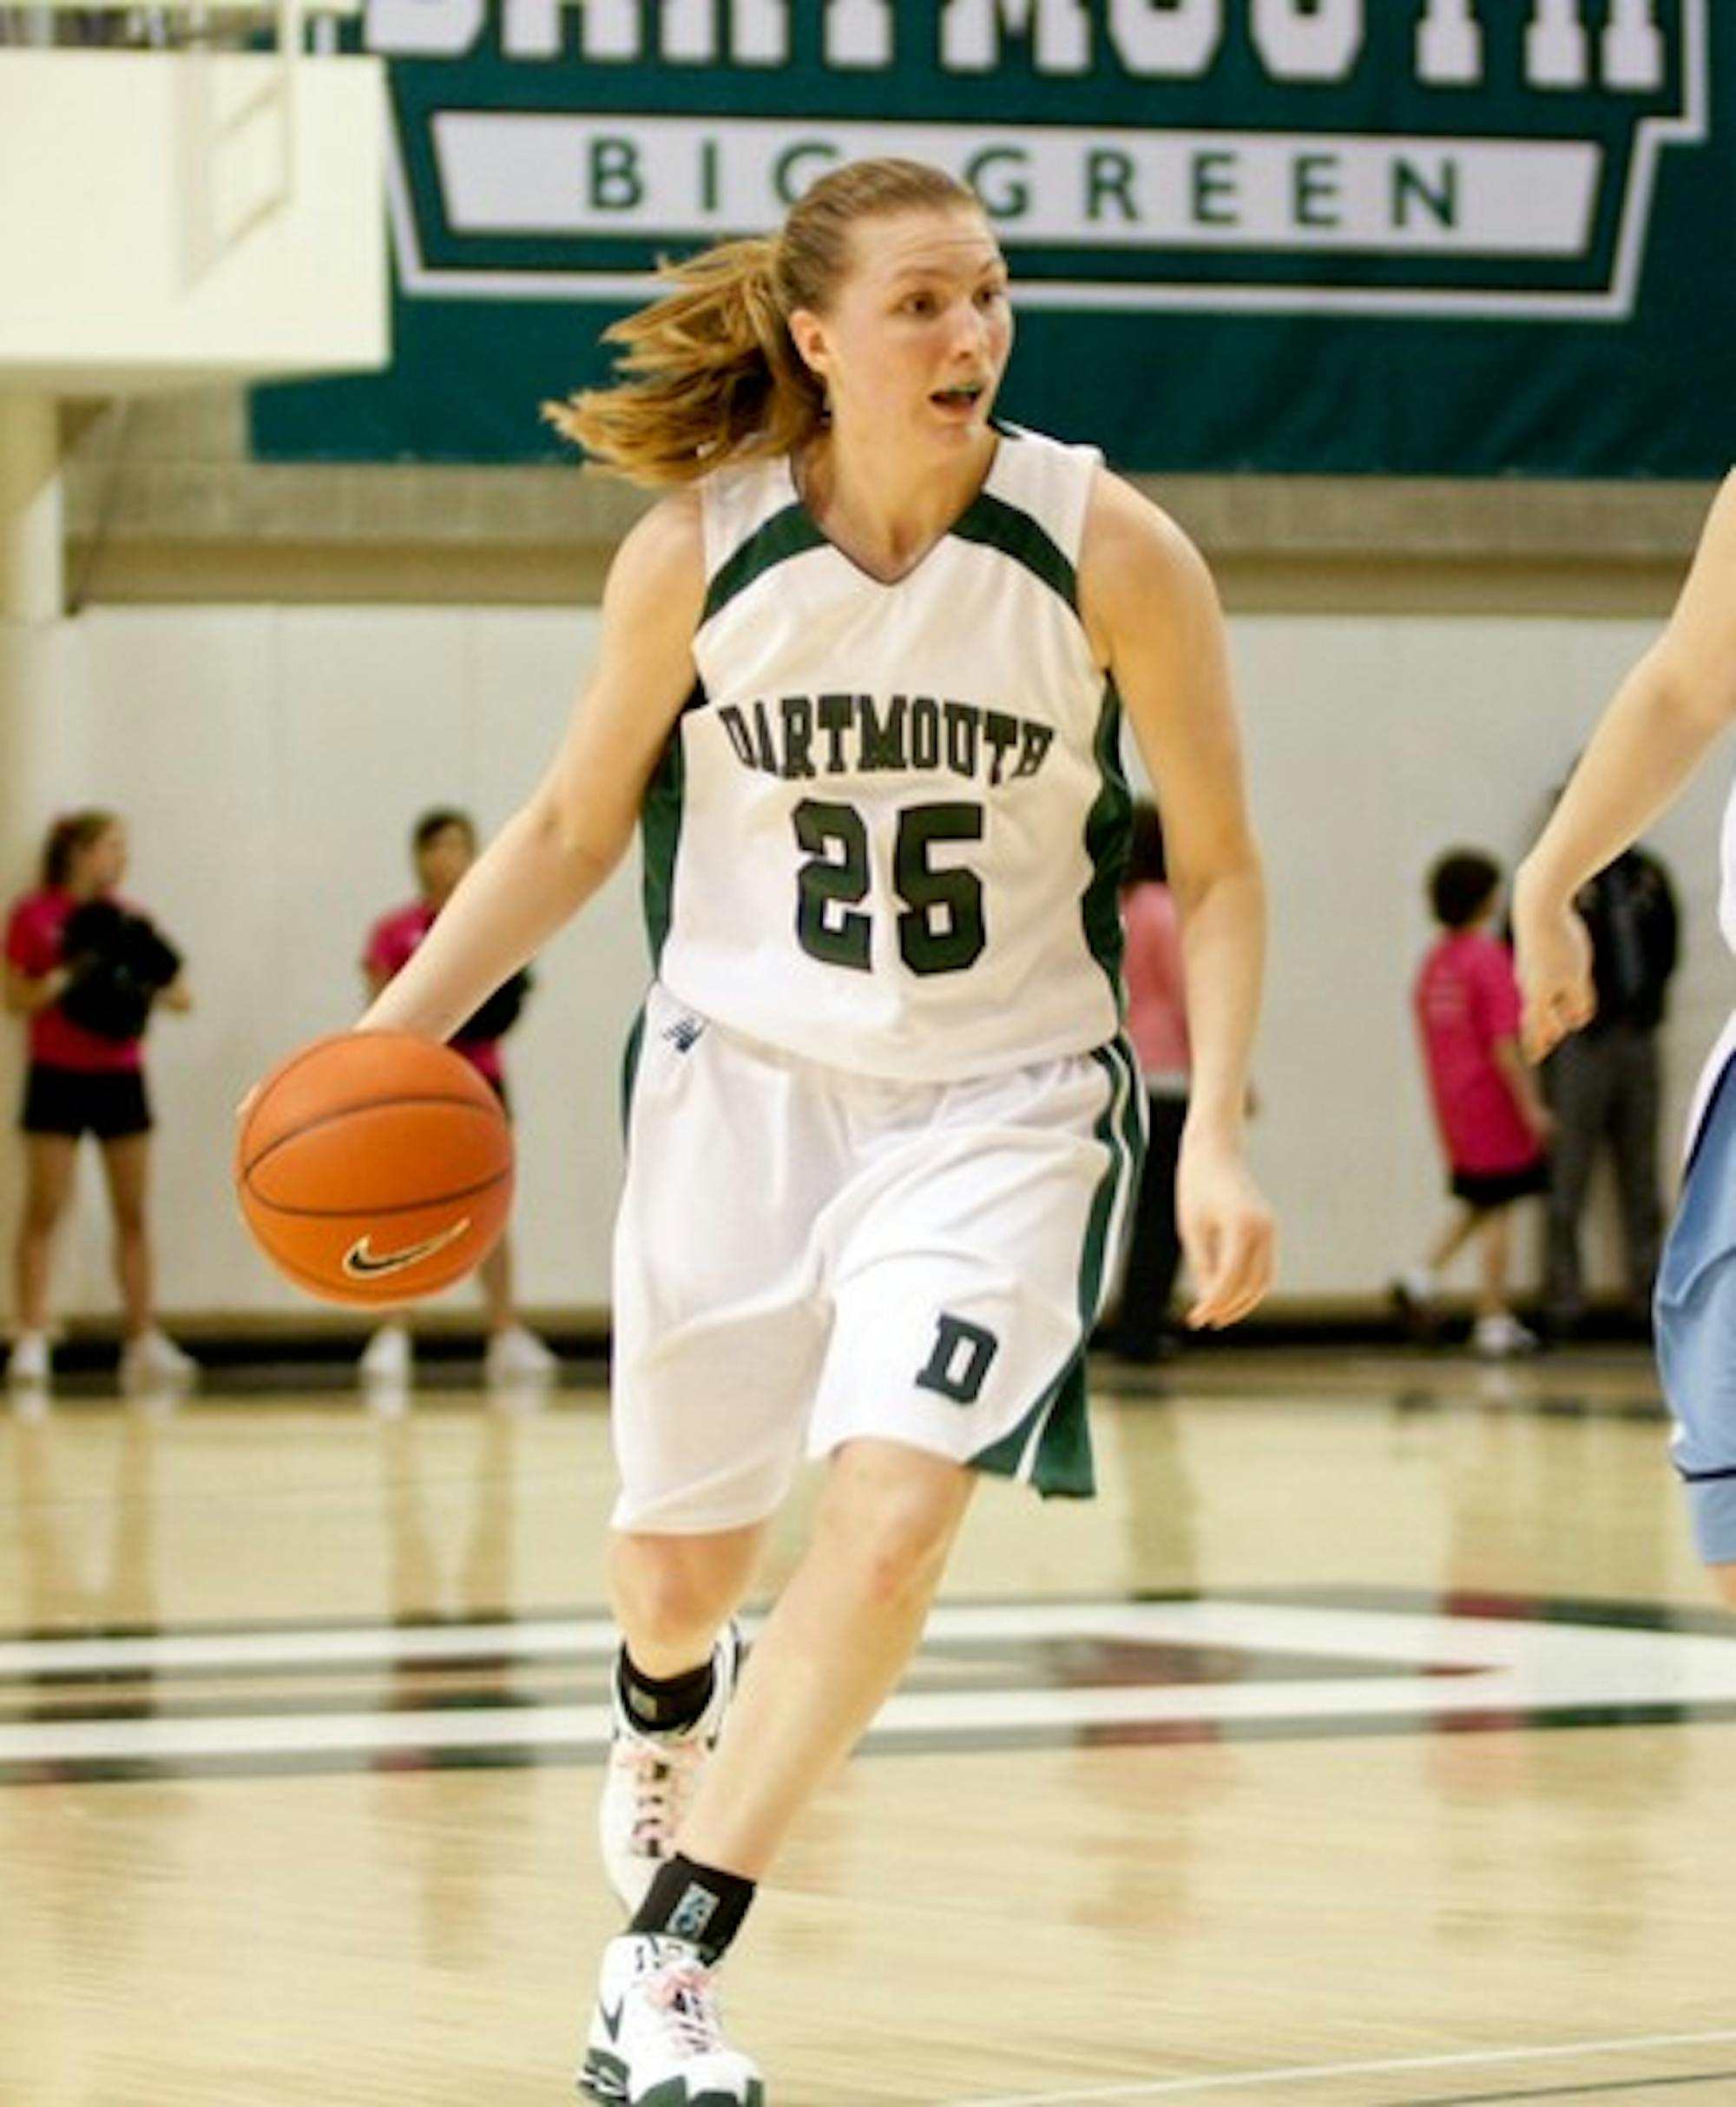 Co-captain Darcy Rose '09 had two straight double-doubles this weekend, scoring 17 points and taking 10 rebounds against Columbia Saturday night.